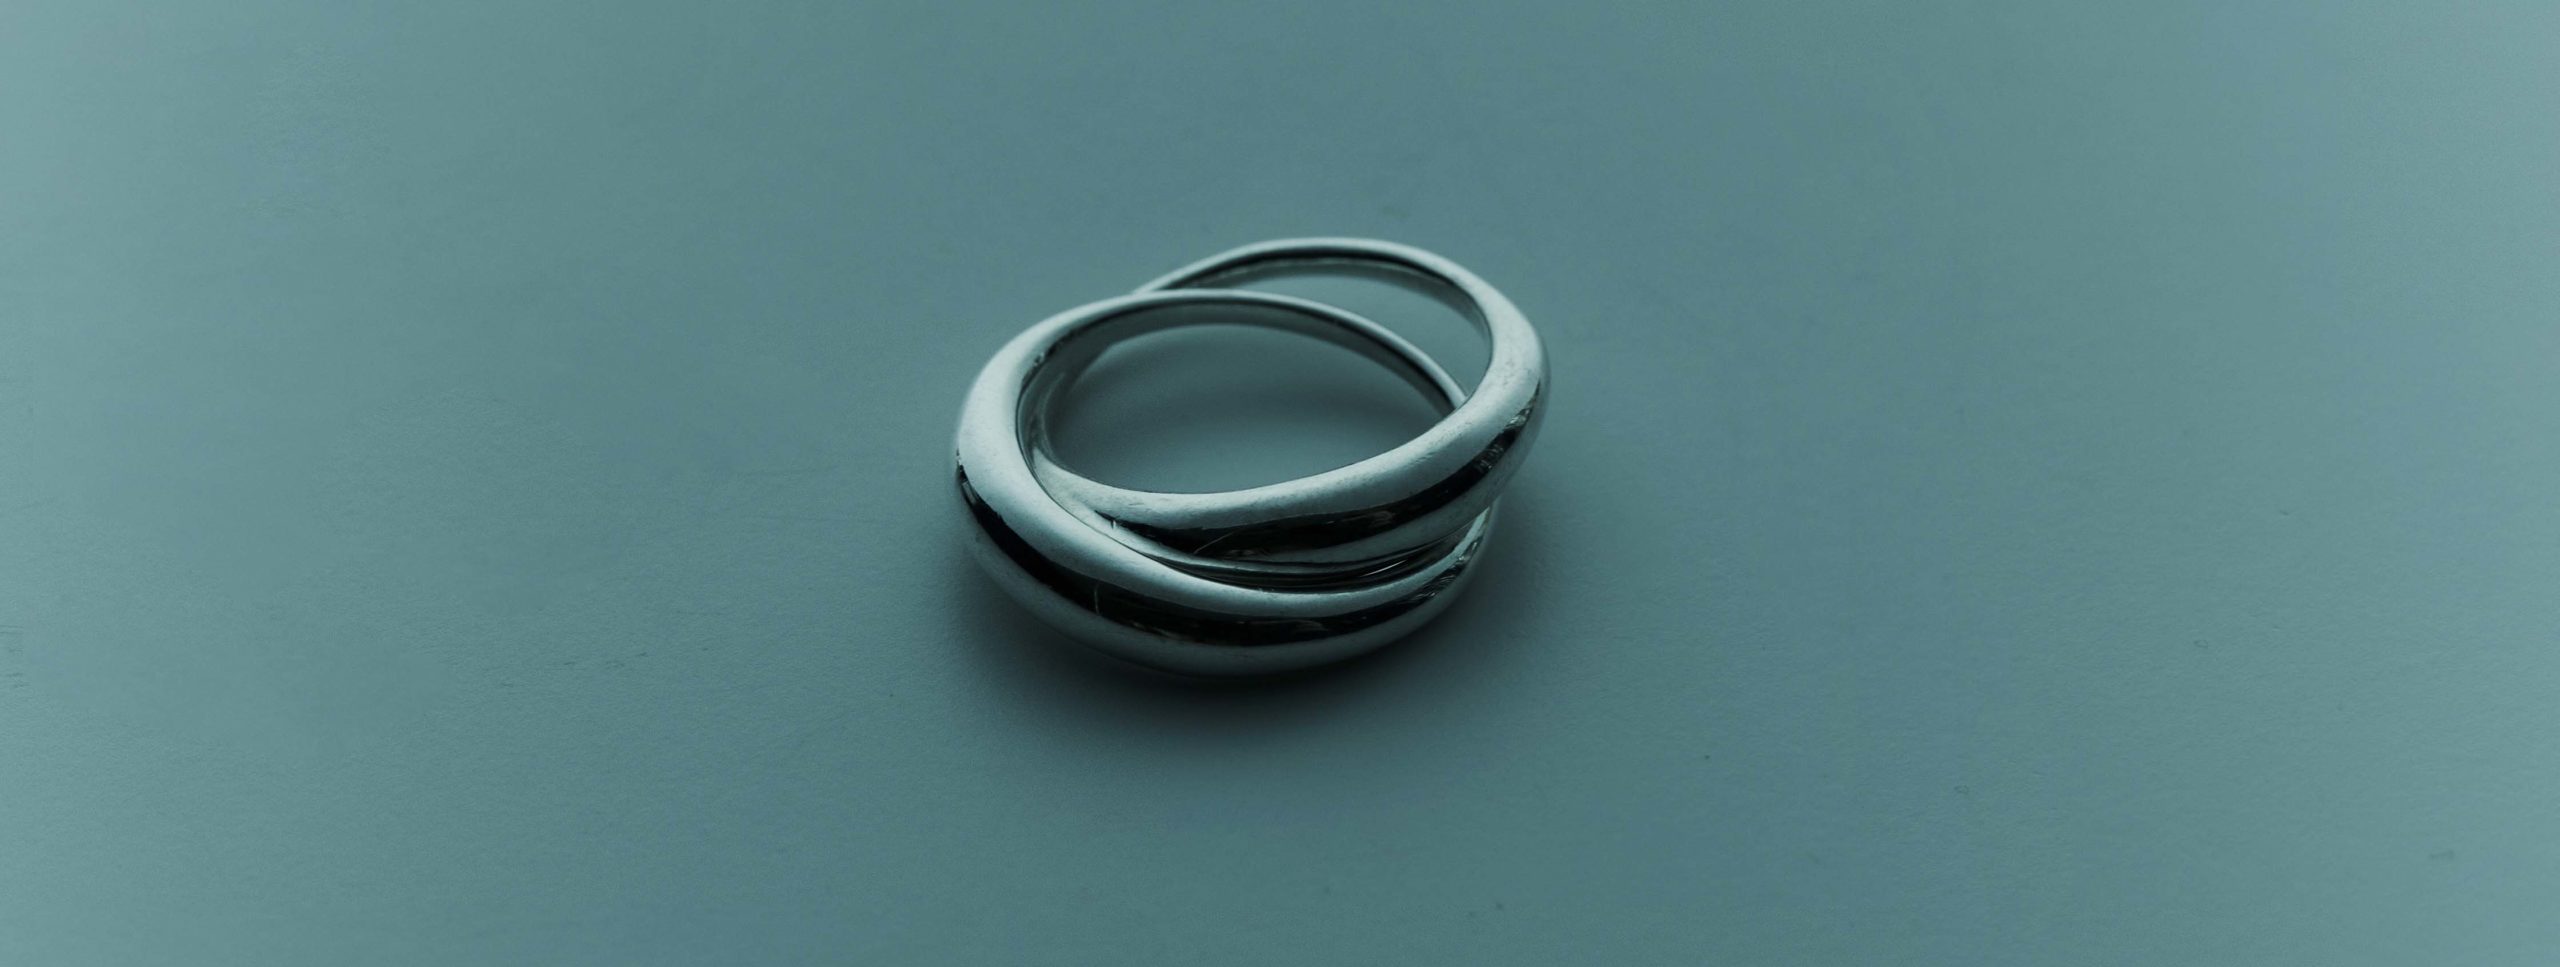 plump double ring